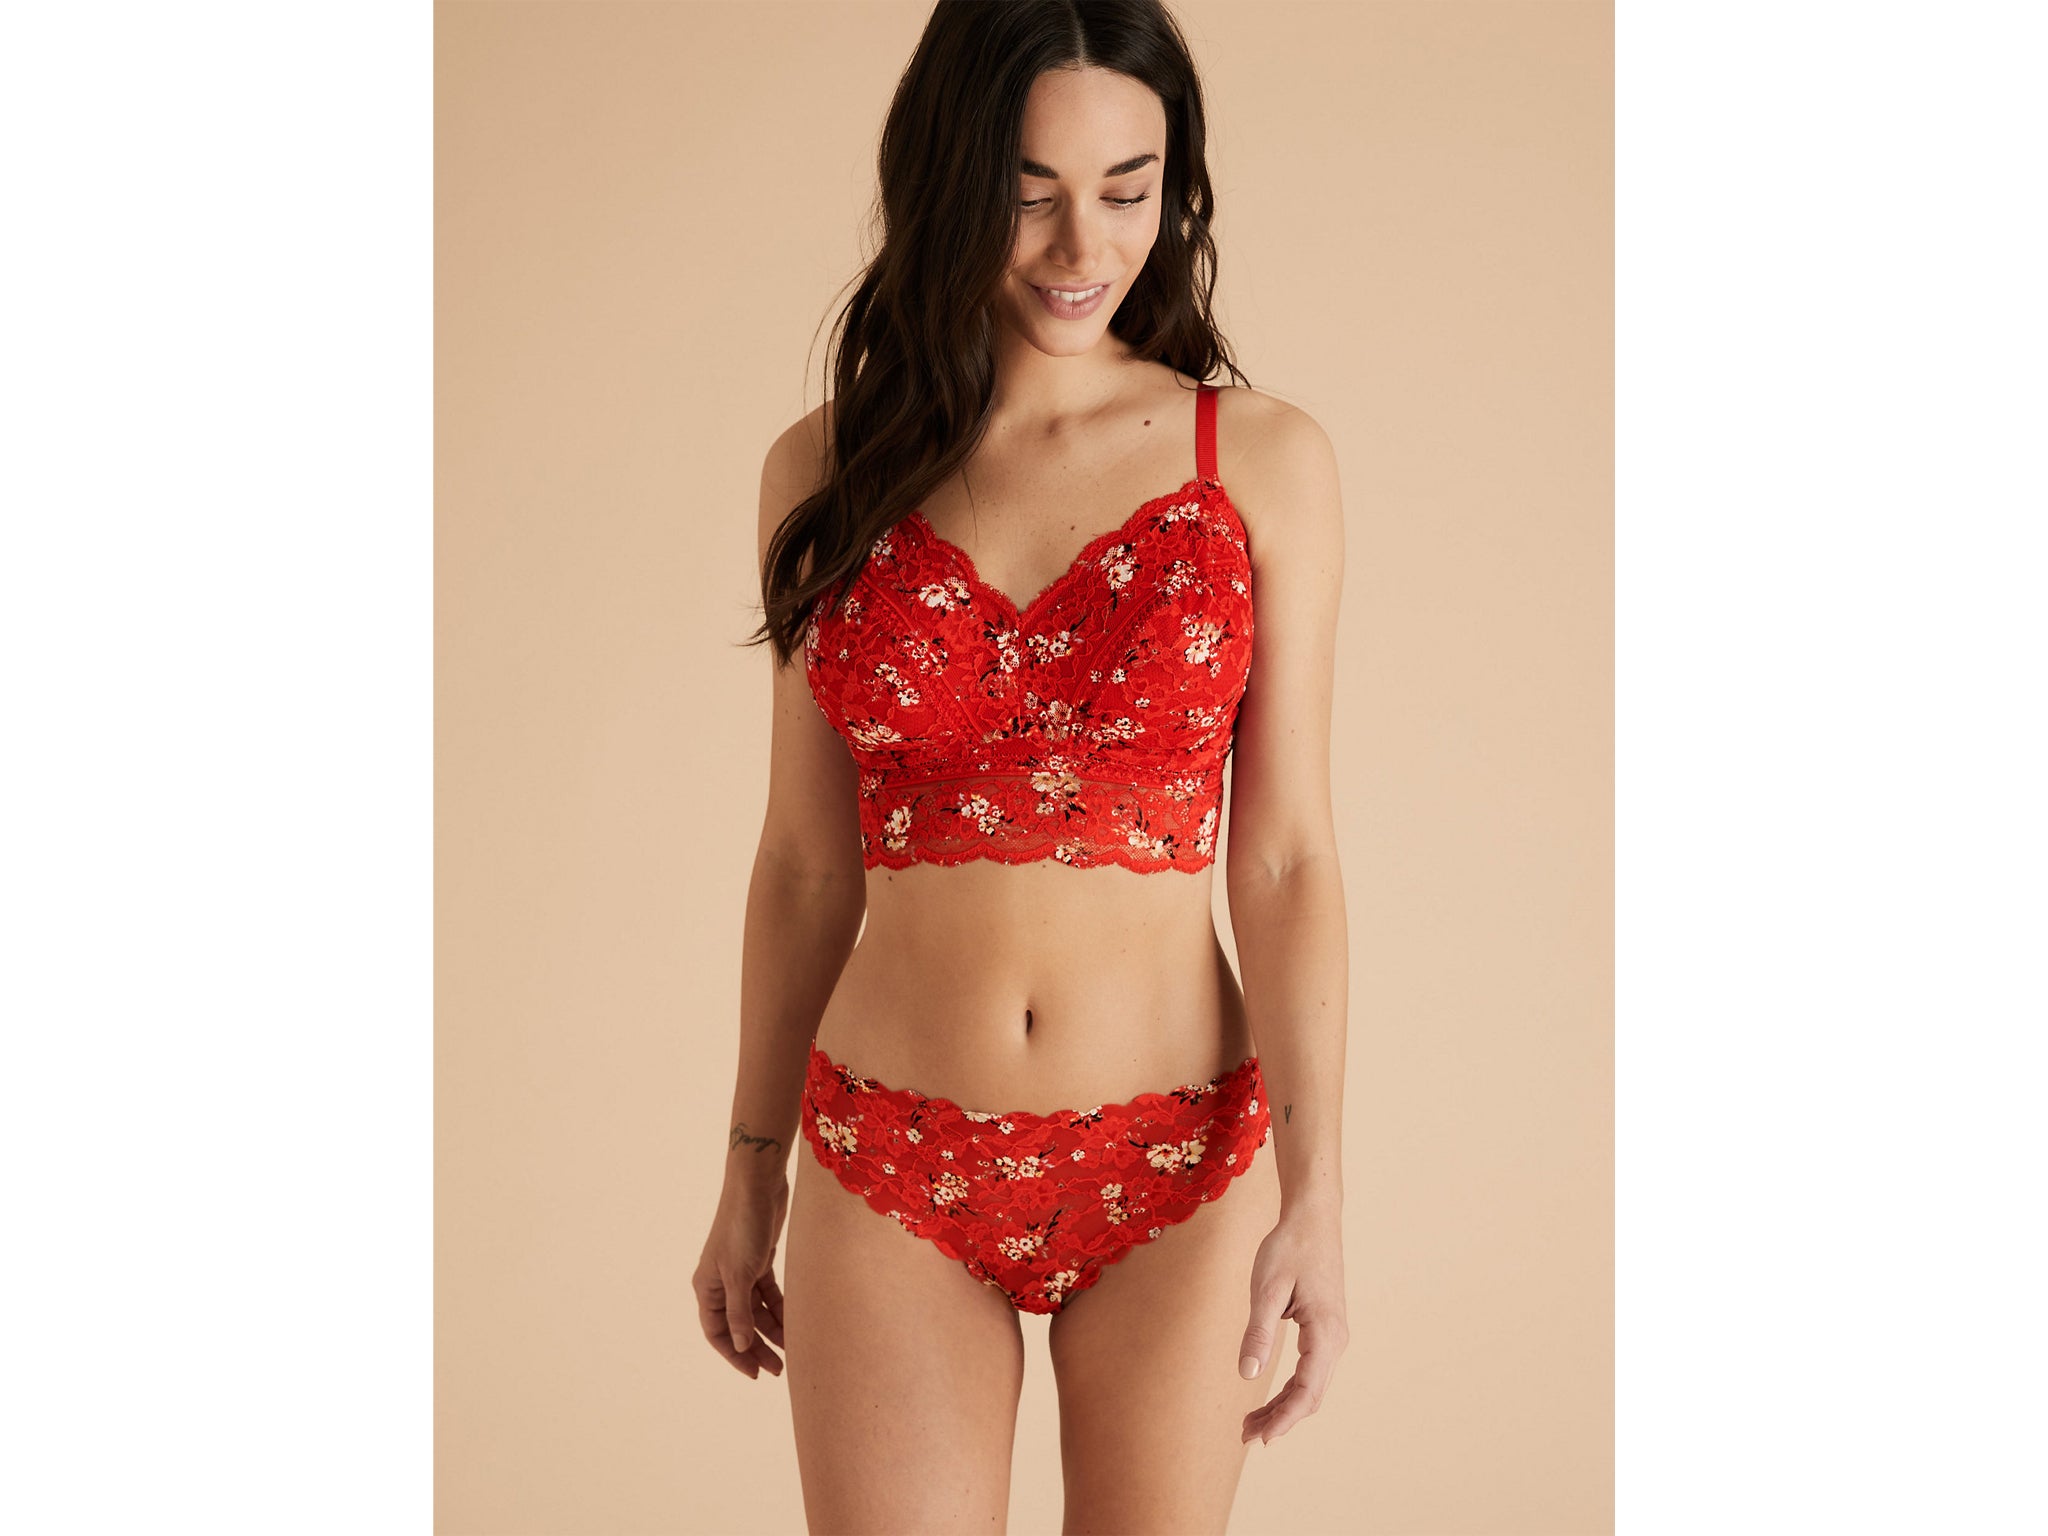 Emily Floral Lace Bralette with Bow